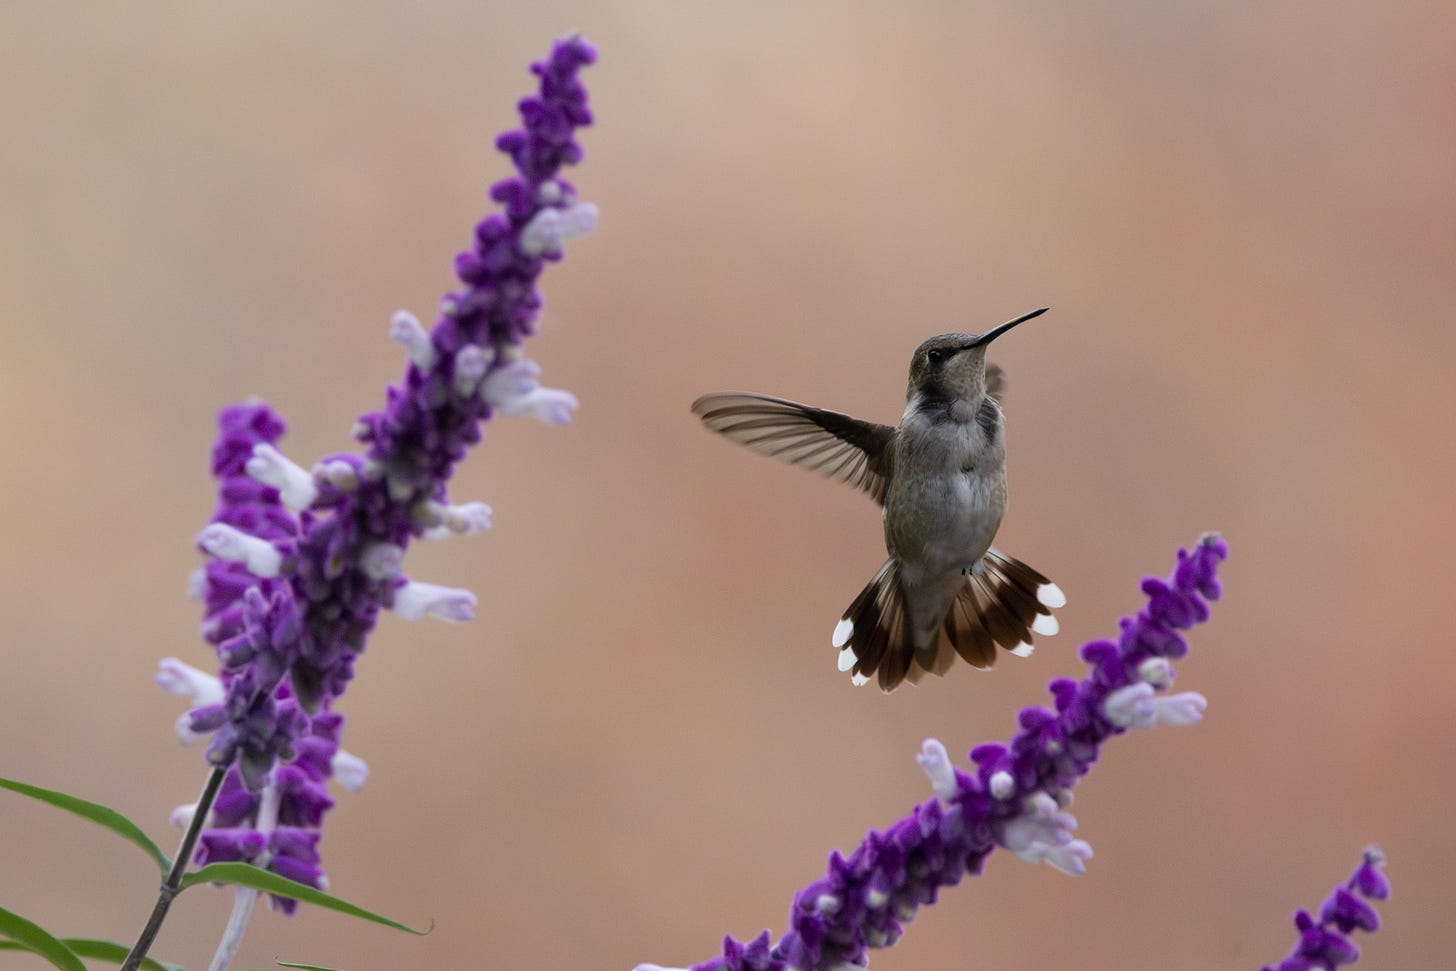 a small bird with a long, needle-thin beak, gray belly, and short rounded wings heled outstretched with its tail feathers fanned out. it's facing toward the viewer with the head to image right, in between a pair of long stalks with small purple flowers. around them, like lavender (though it's salvia, not lavender)